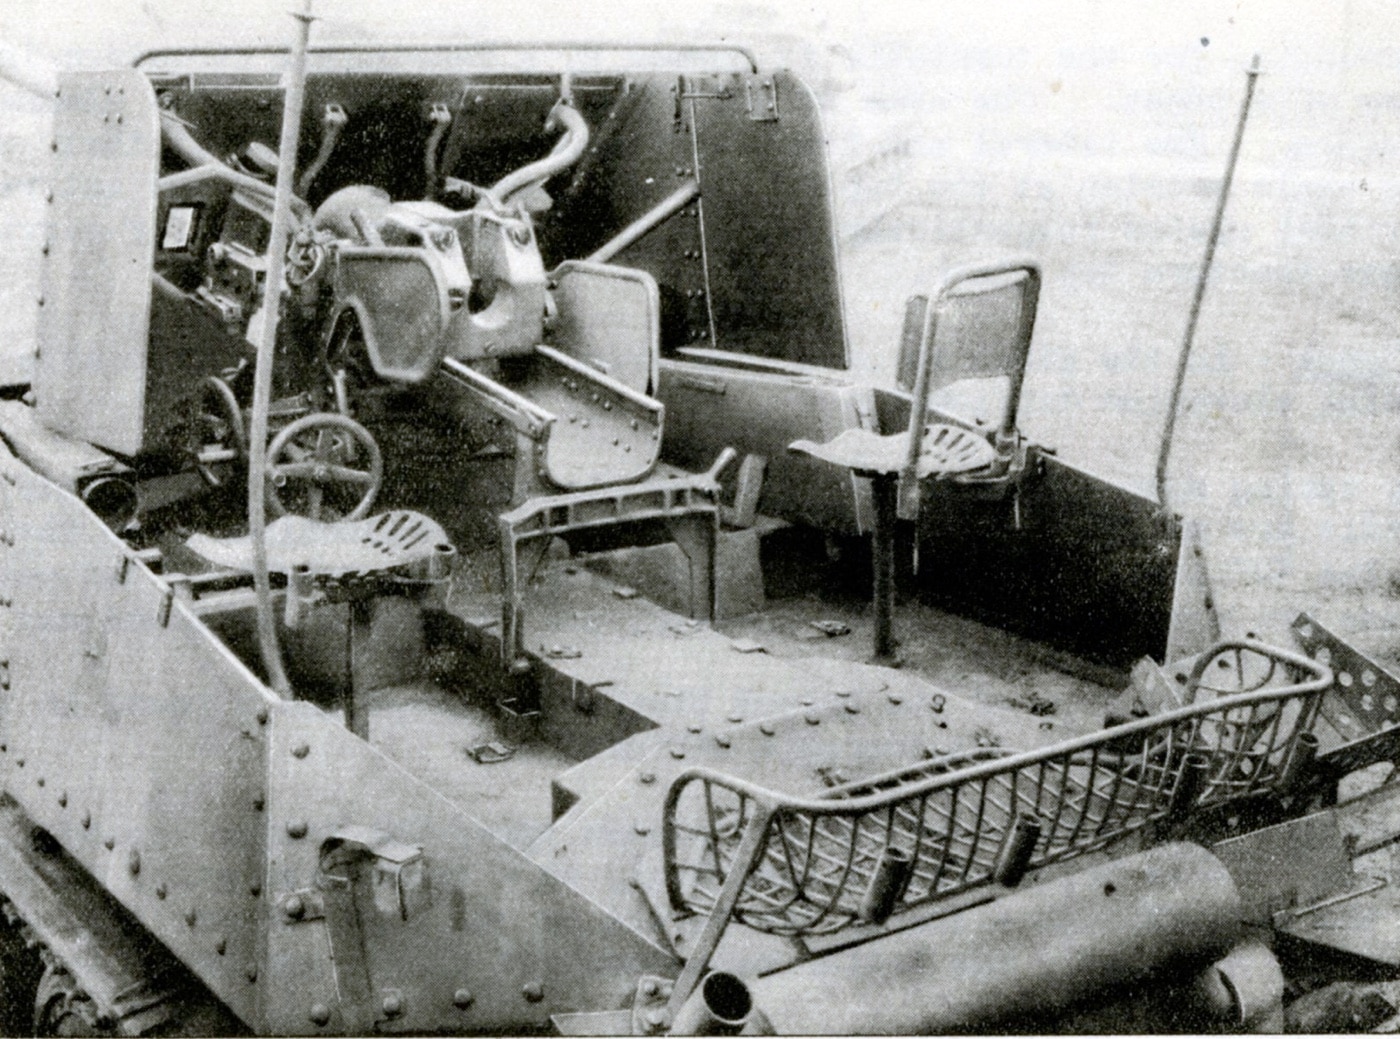 crew compartment of marder iii